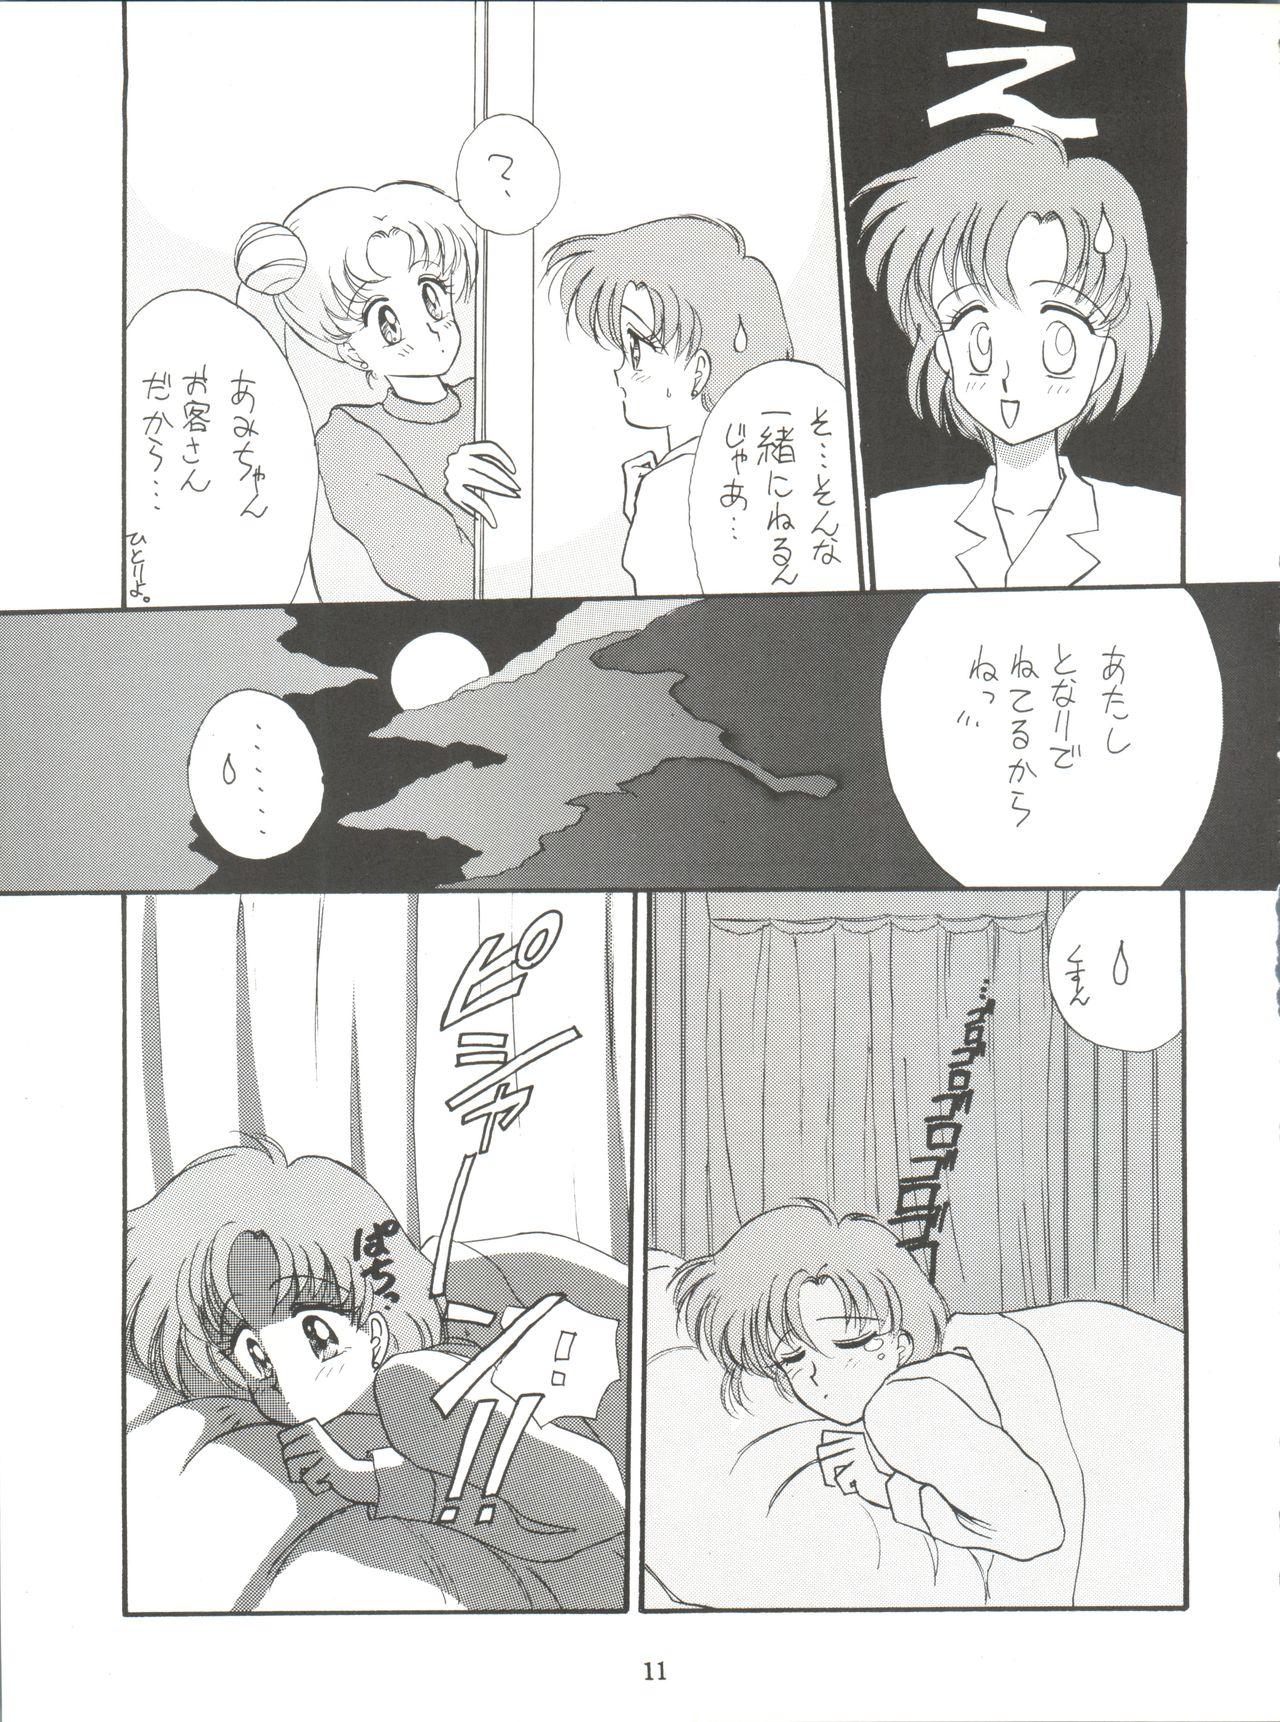 Perfect Let's get a Groove - Sailor moon Blowing - Page 13